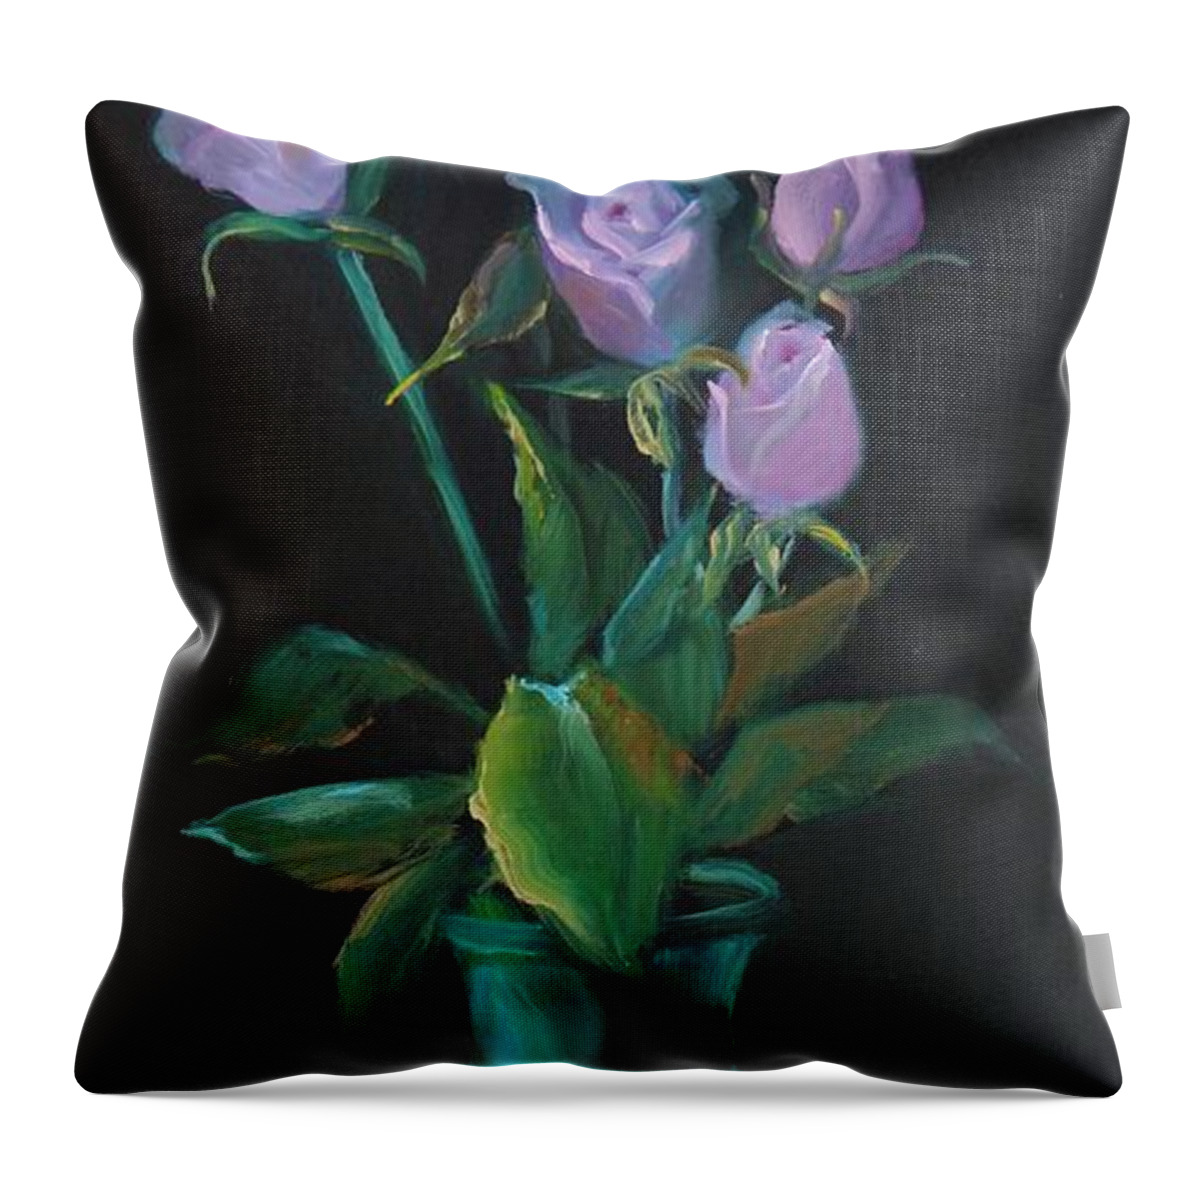 Rose Buds Throw Pillow featuring the painting Pure Elegance by Nataya Crow